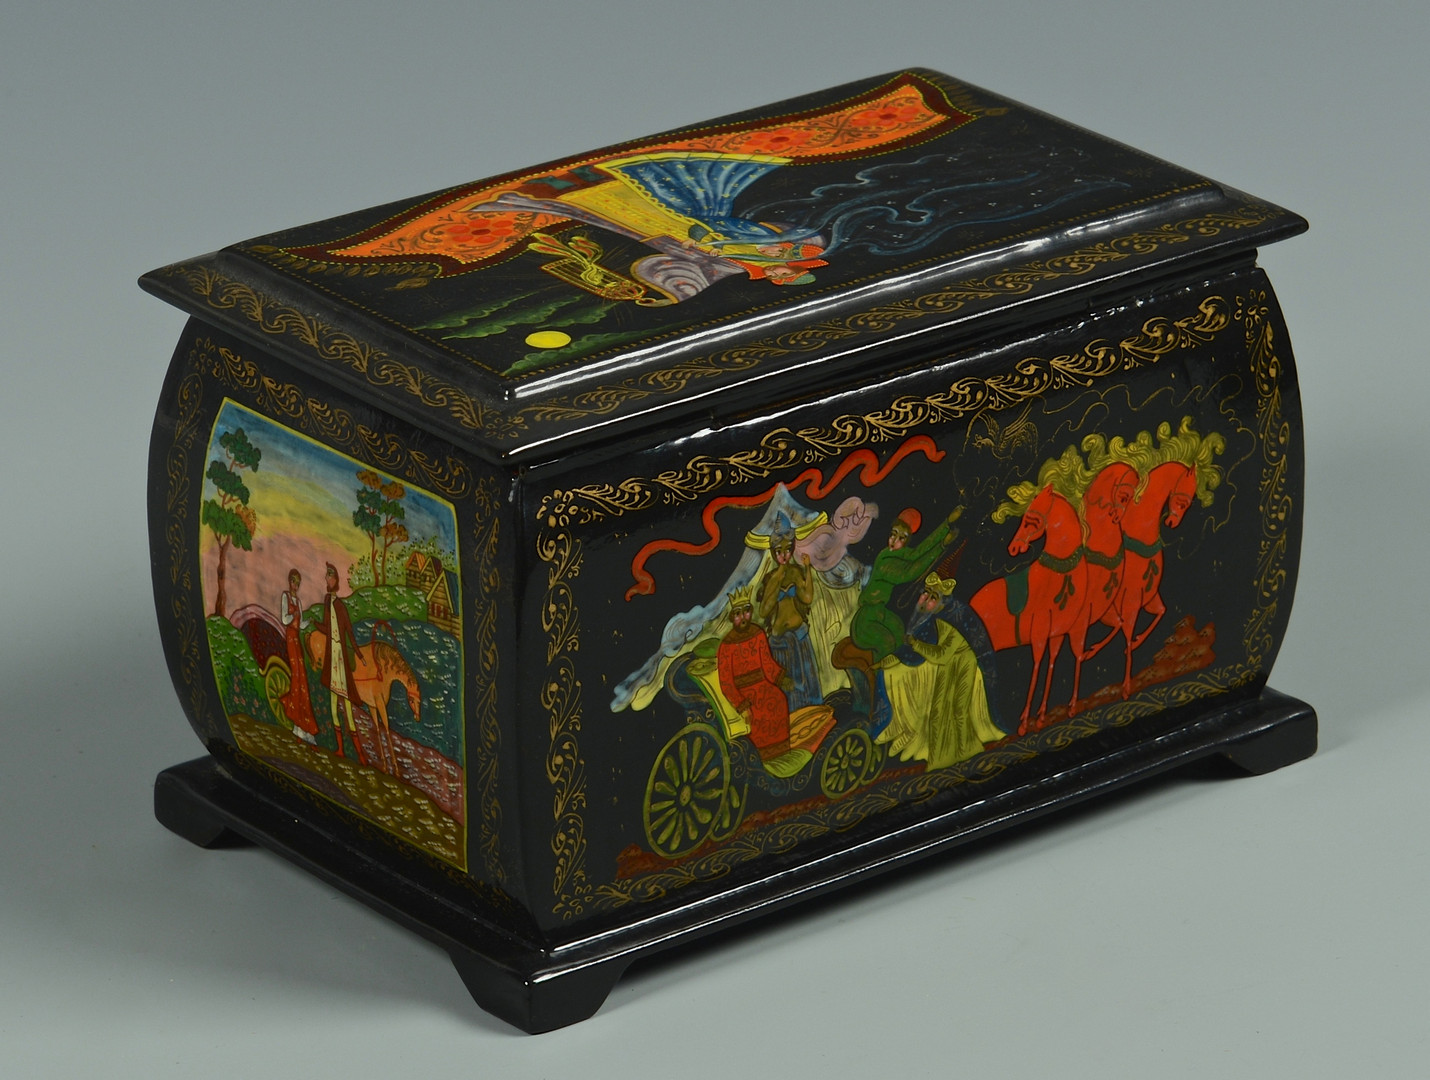 Russian Lacquer Boxes In 103